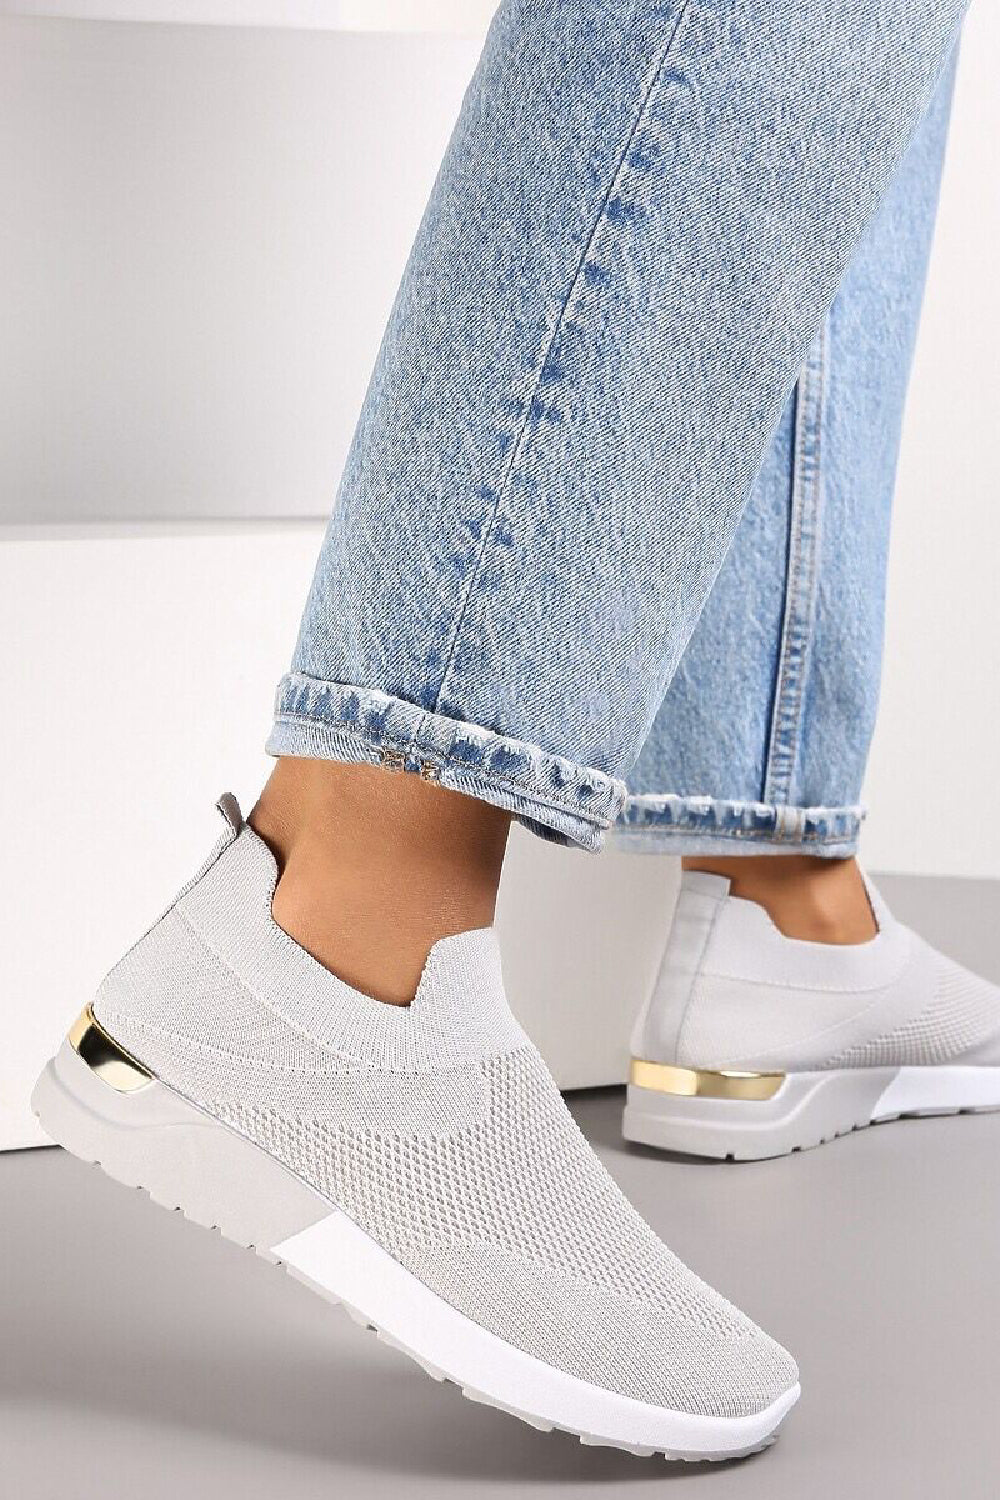 GREY SLIP ON GOLD CLIP HEEL DETAIL TRAINERS SHOES